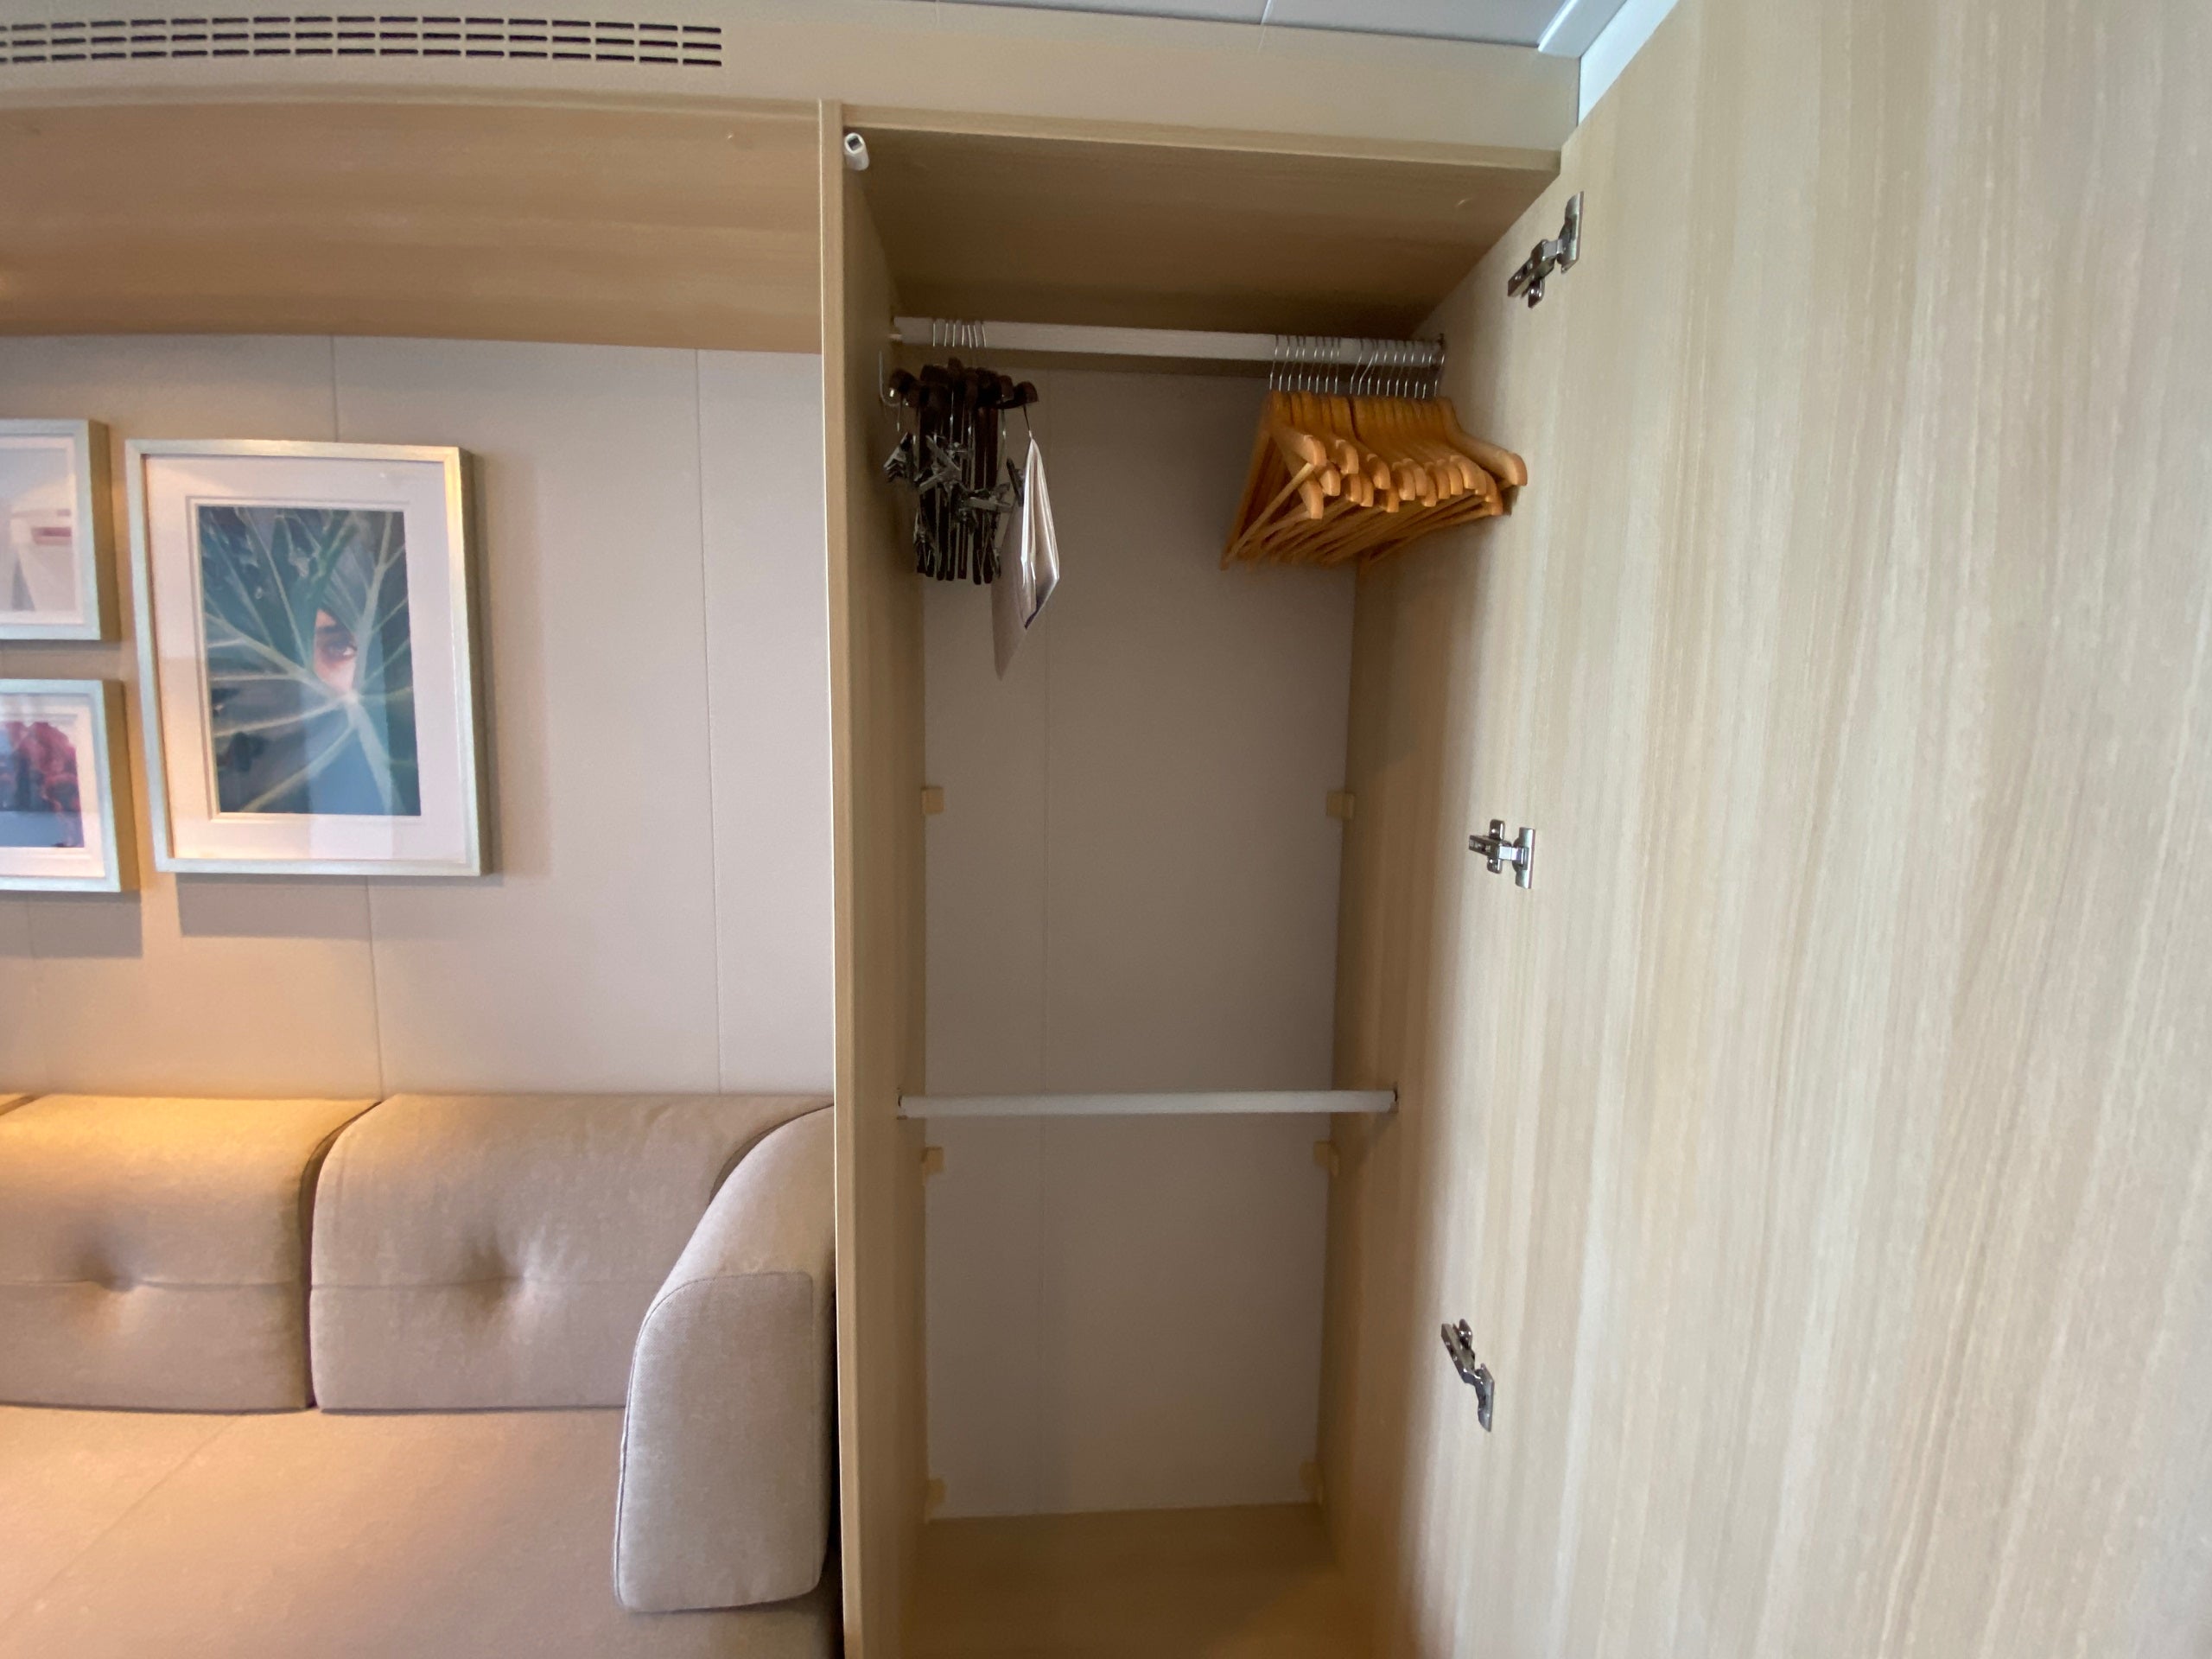 The second closet with a removable bar in a balcony cabin on Royal Caribbean's Wonder of the Seas.